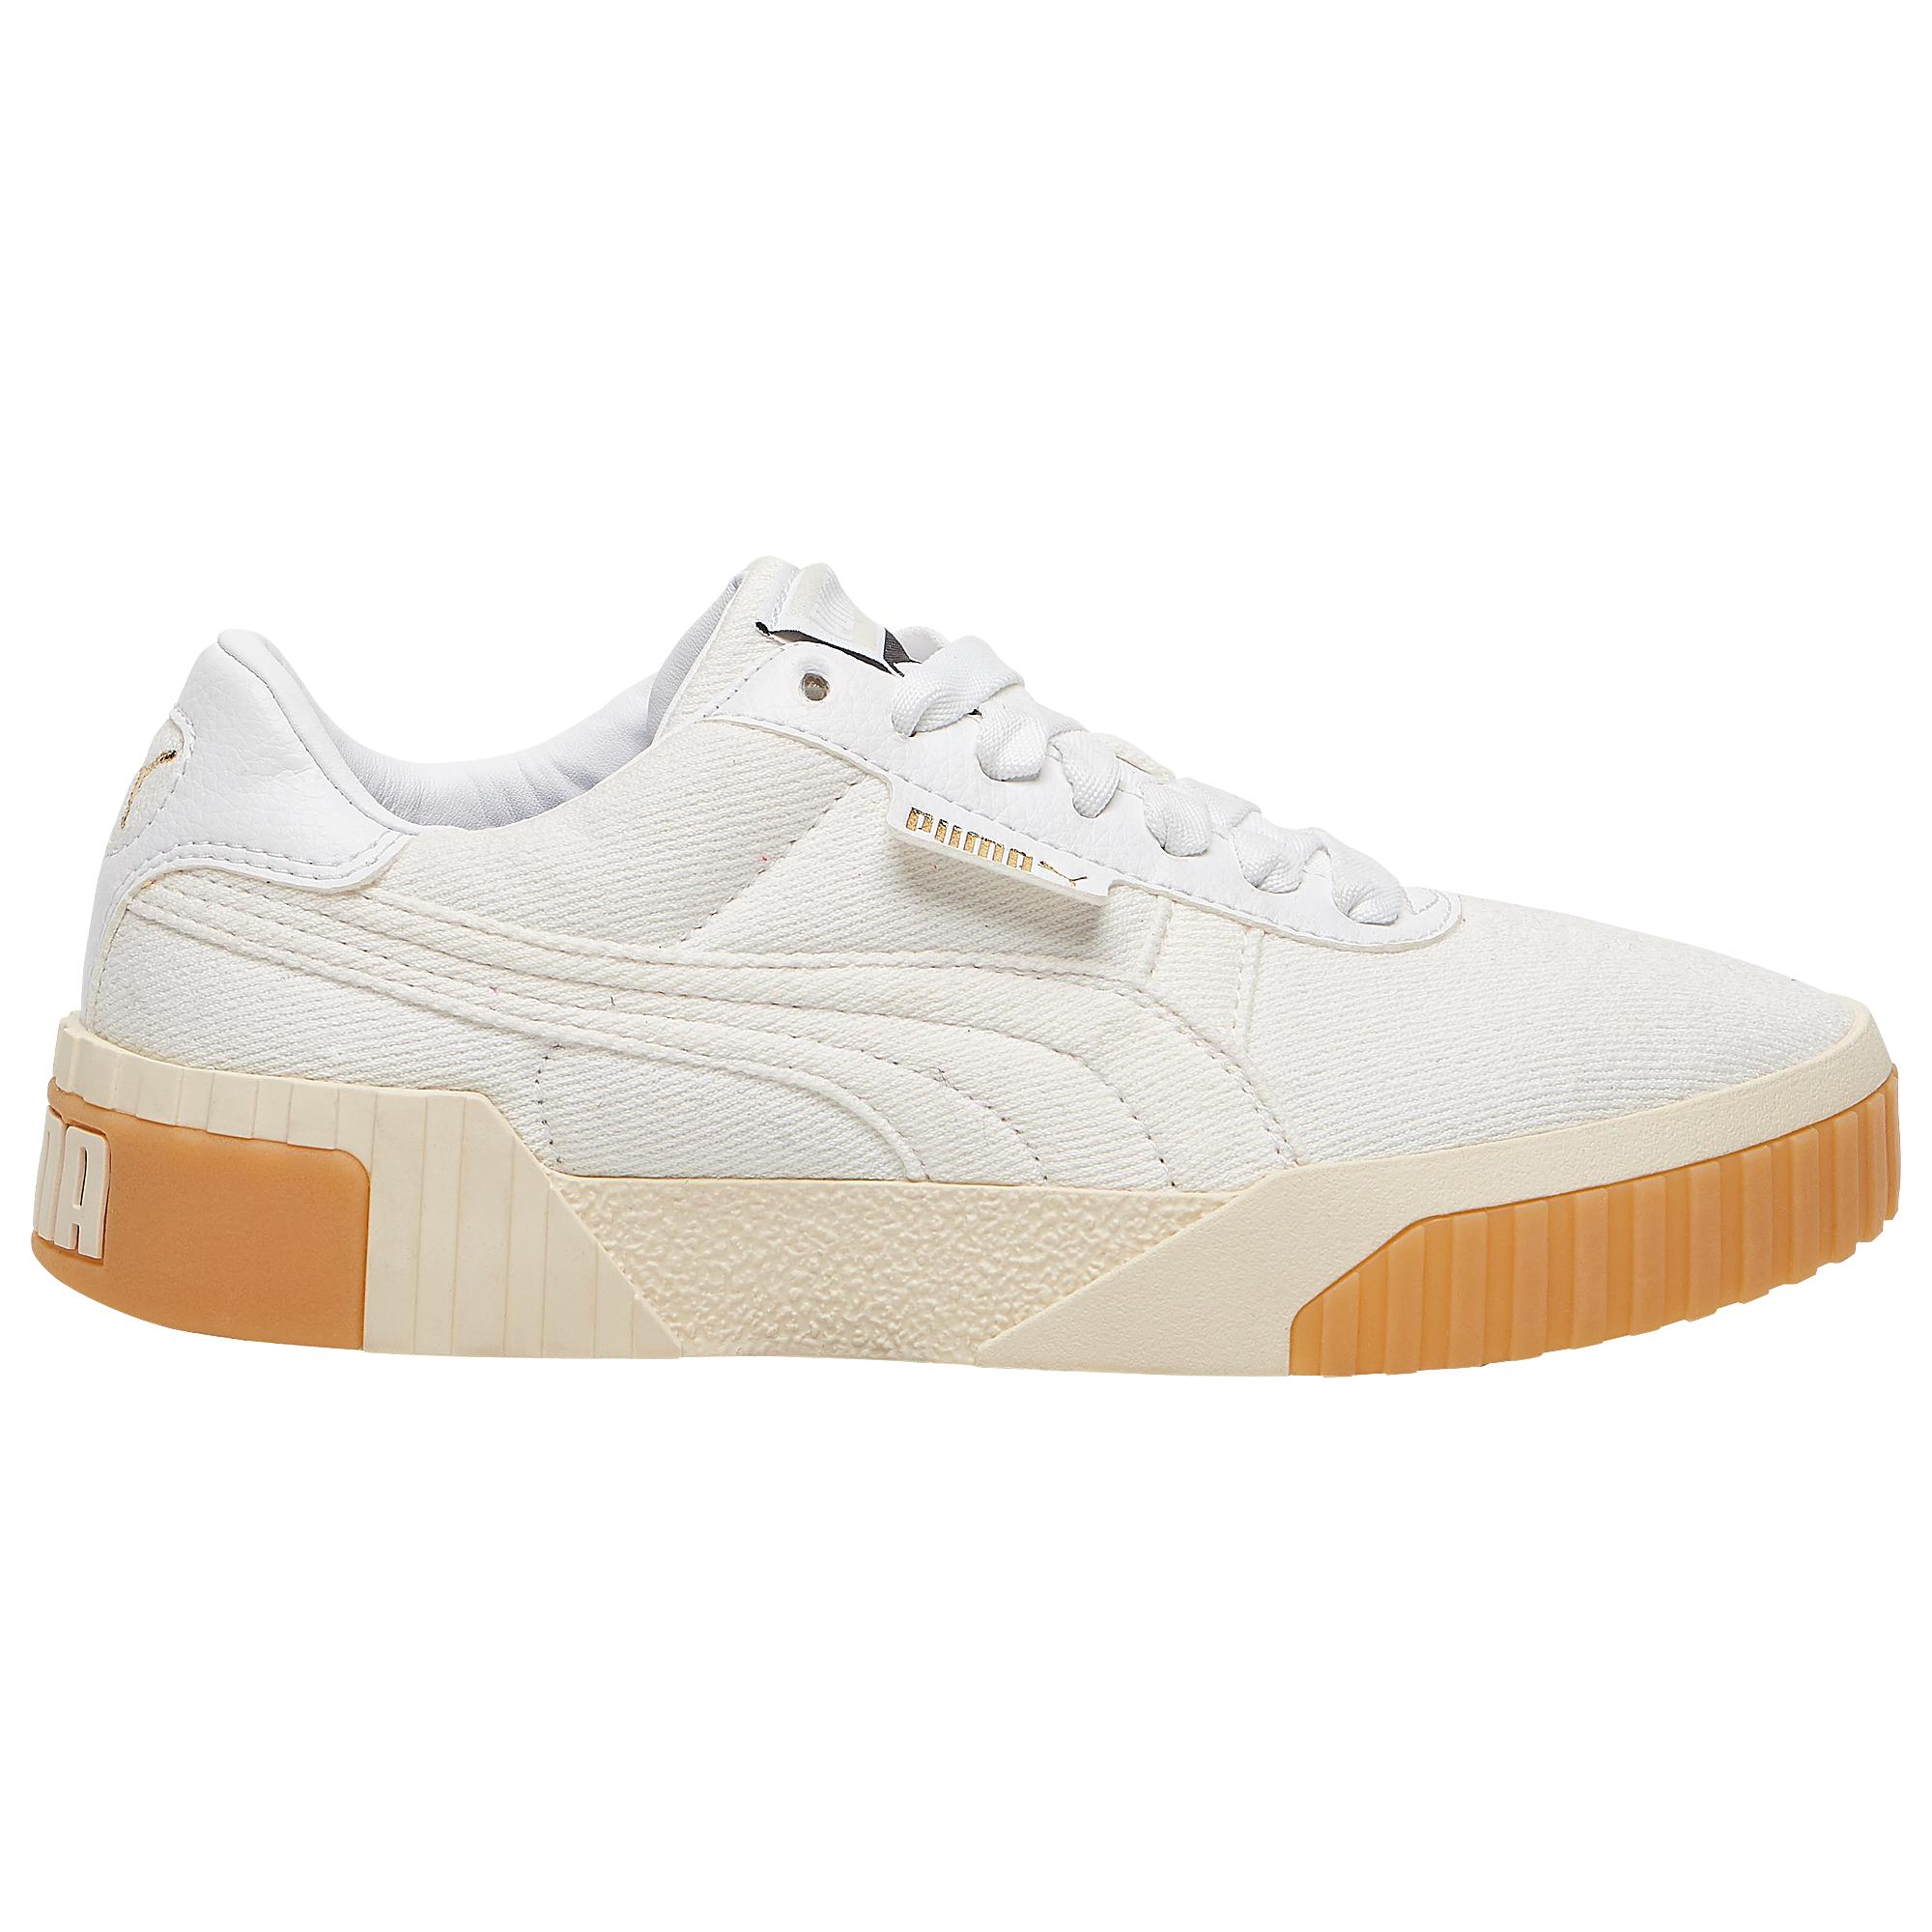 PUMA Canvas Cali Exotic Tennis Shoes in 